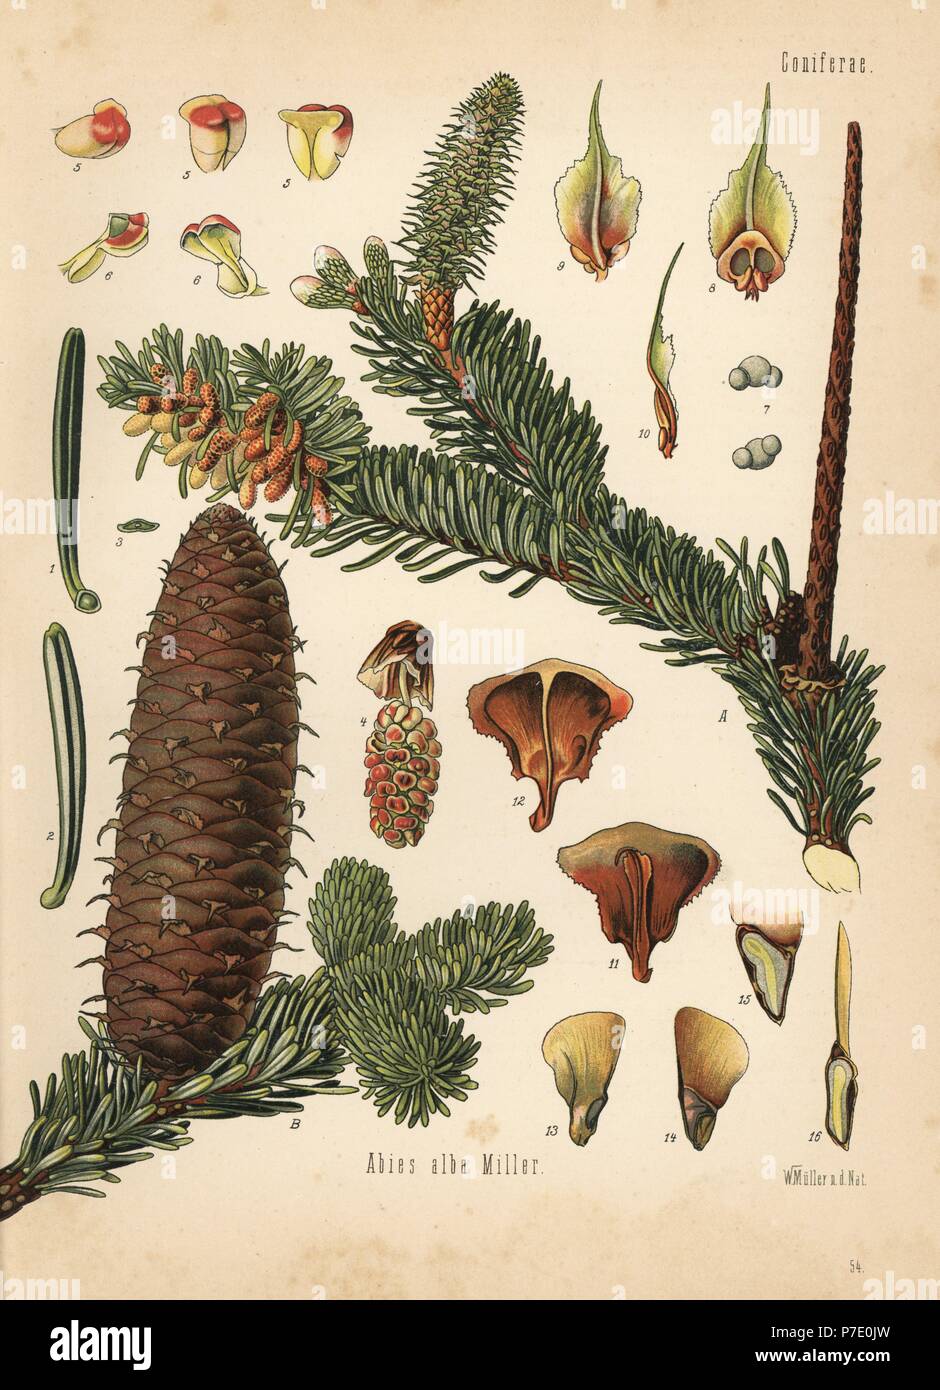 European silver fir, Abies alba. Chromolithograph after a botanical illustration by Walther Muller from Hermann Adolph Koehler's Medicinal Plants, edited by Gustav Pabst, Koehler, Germany, 1887. Stock Photo